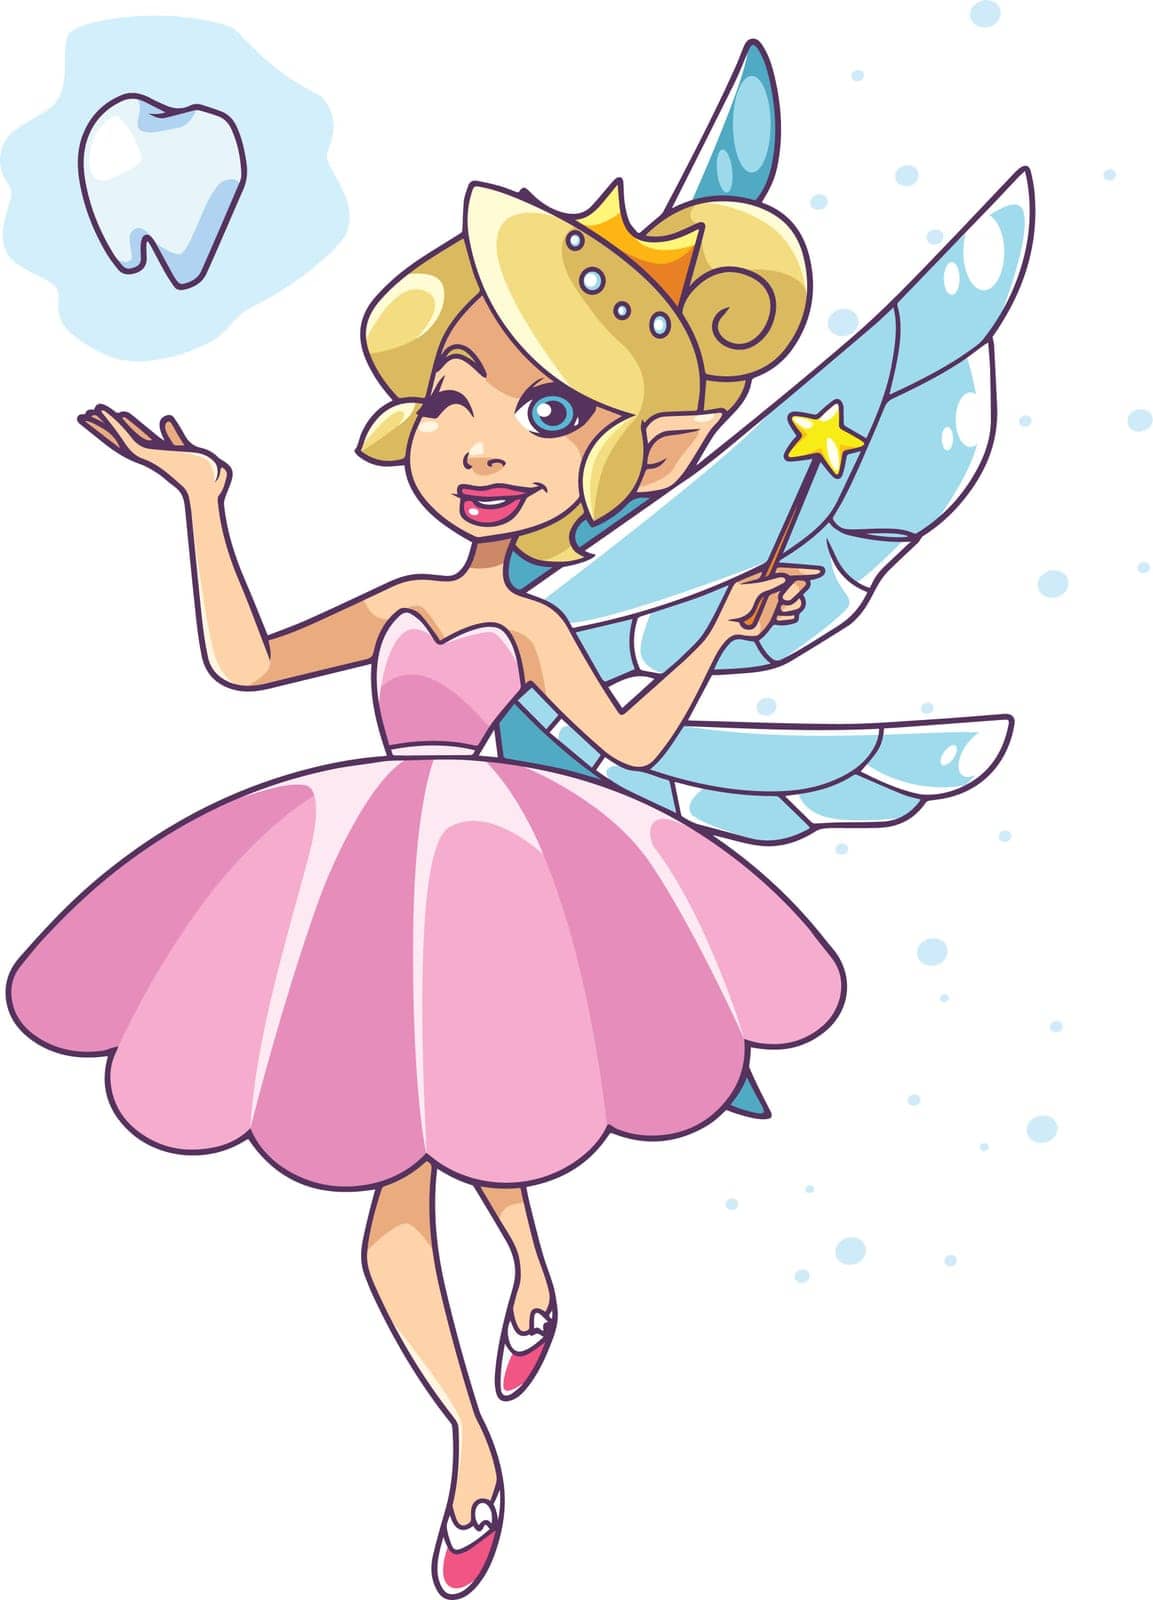 Illustration of the happy tooth fairy, flying on white background.